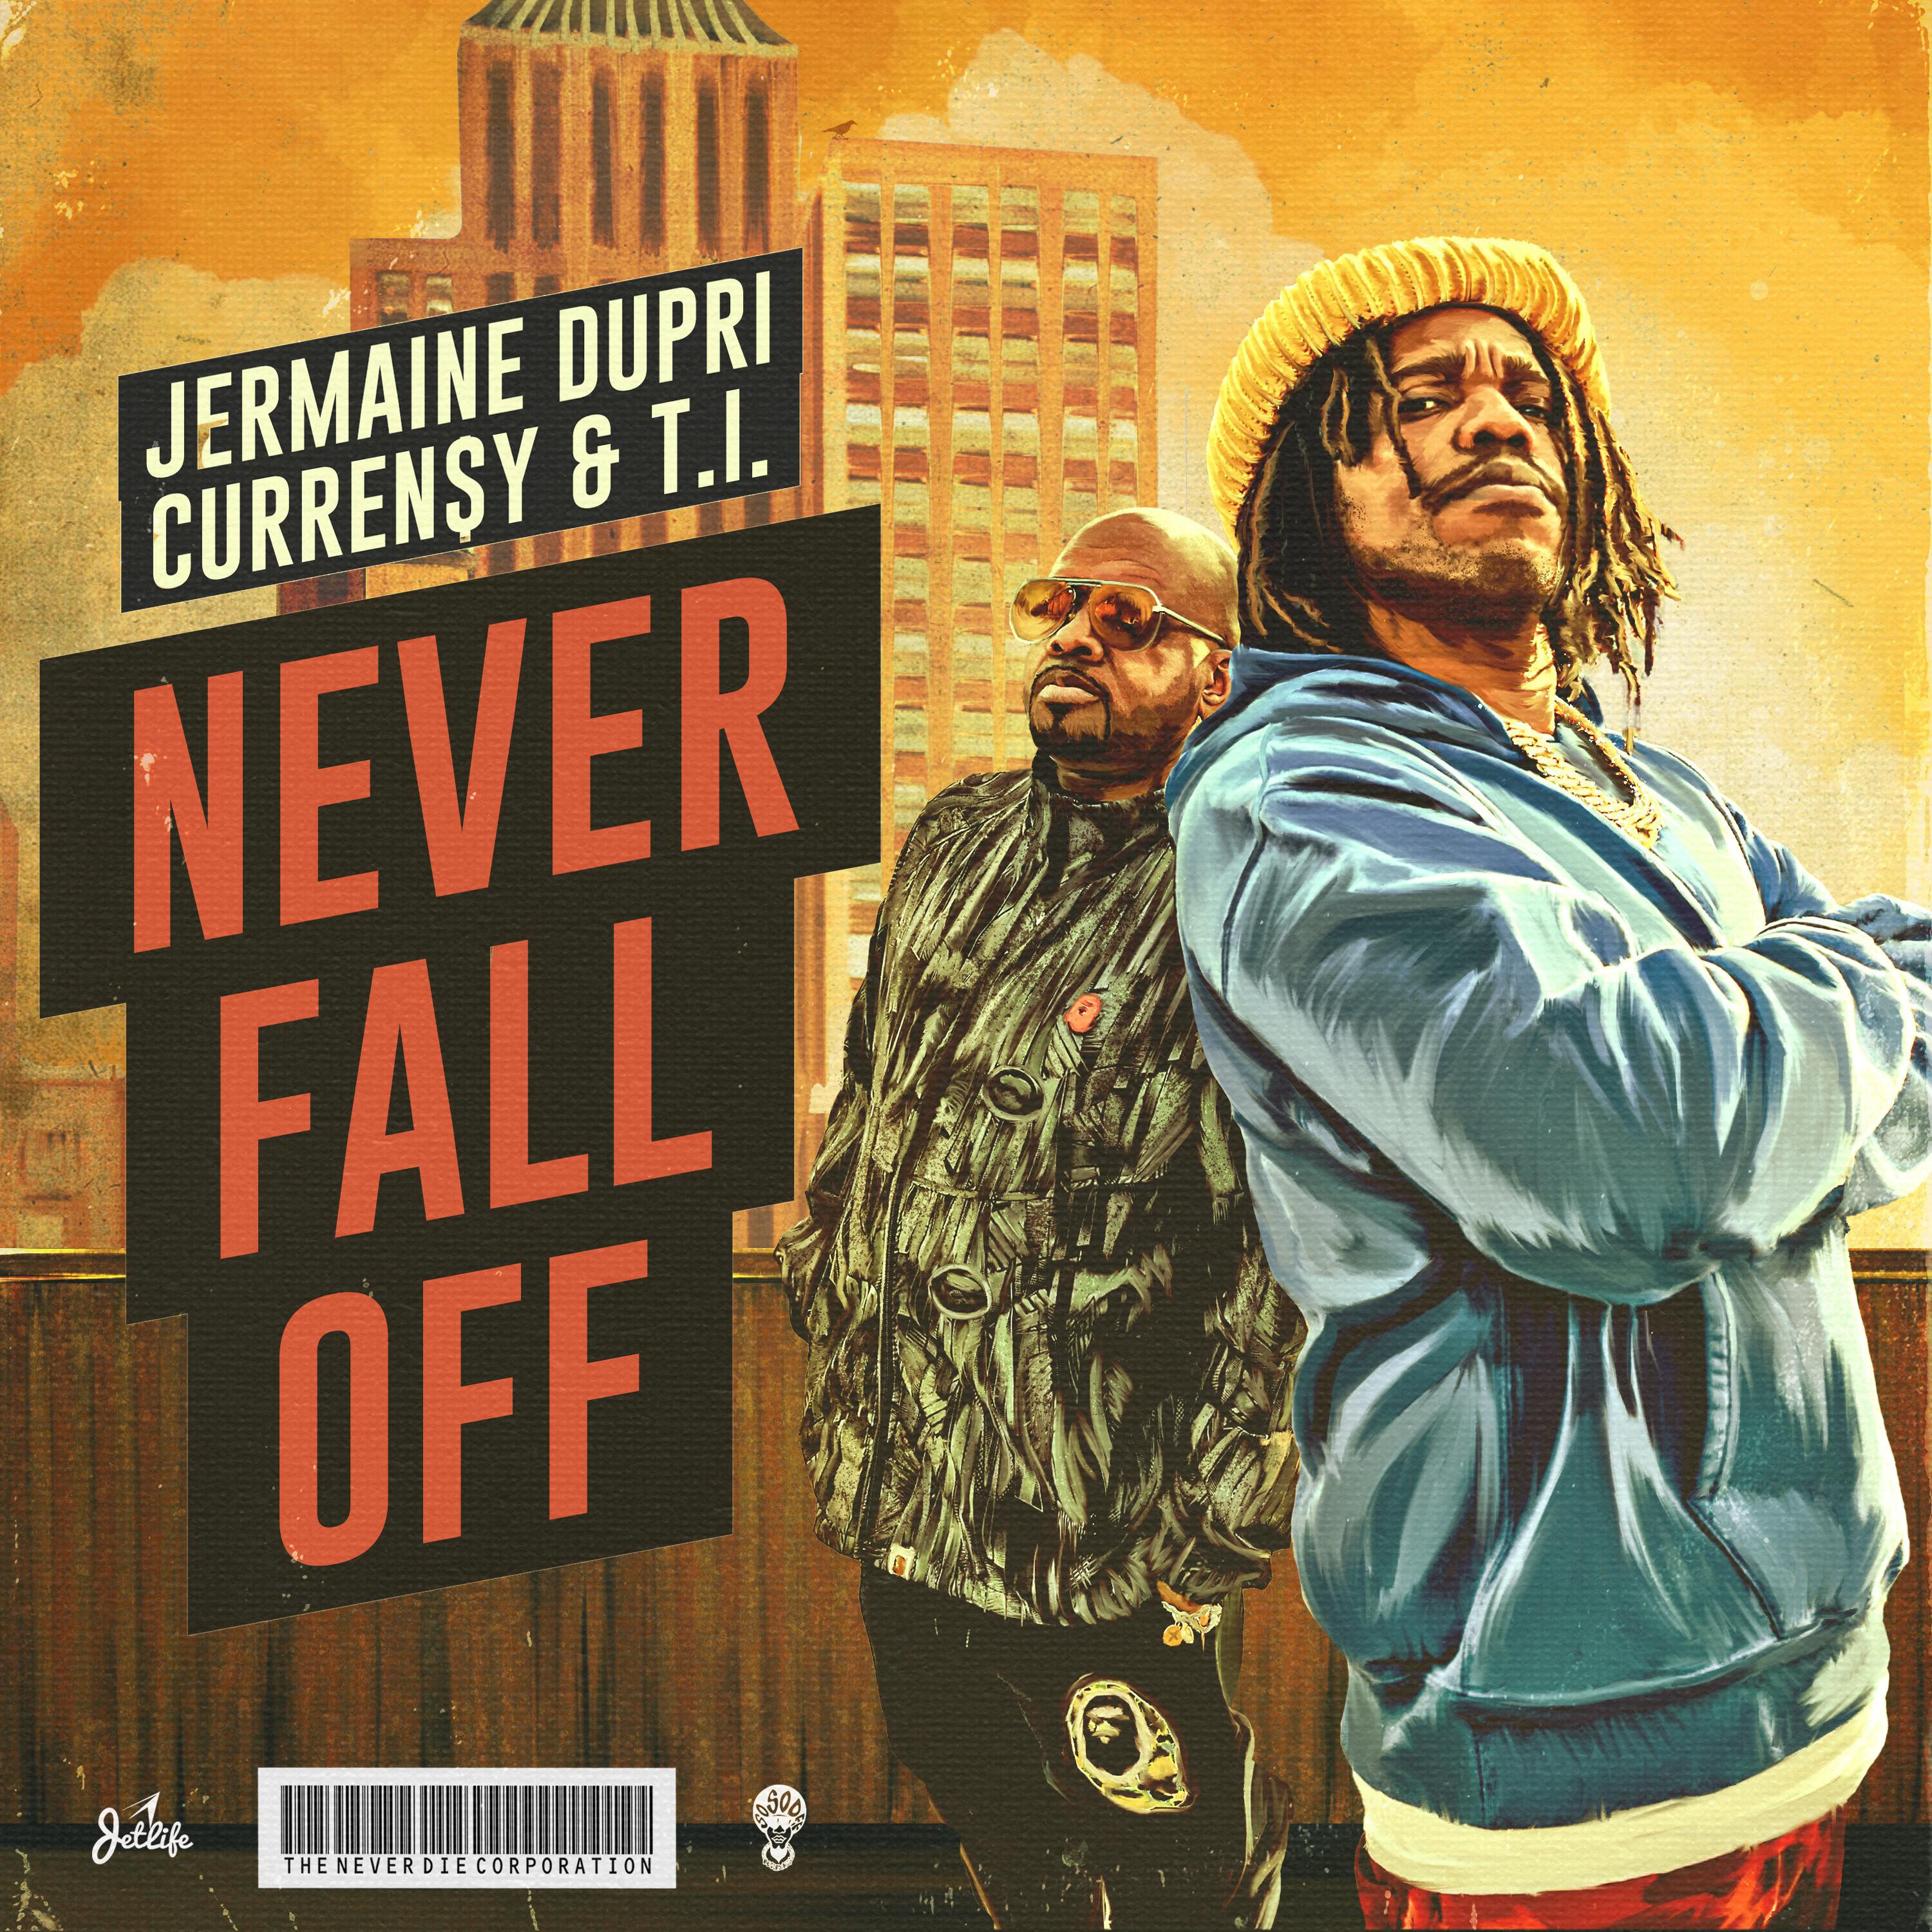 Curren$y - Never Fall Off